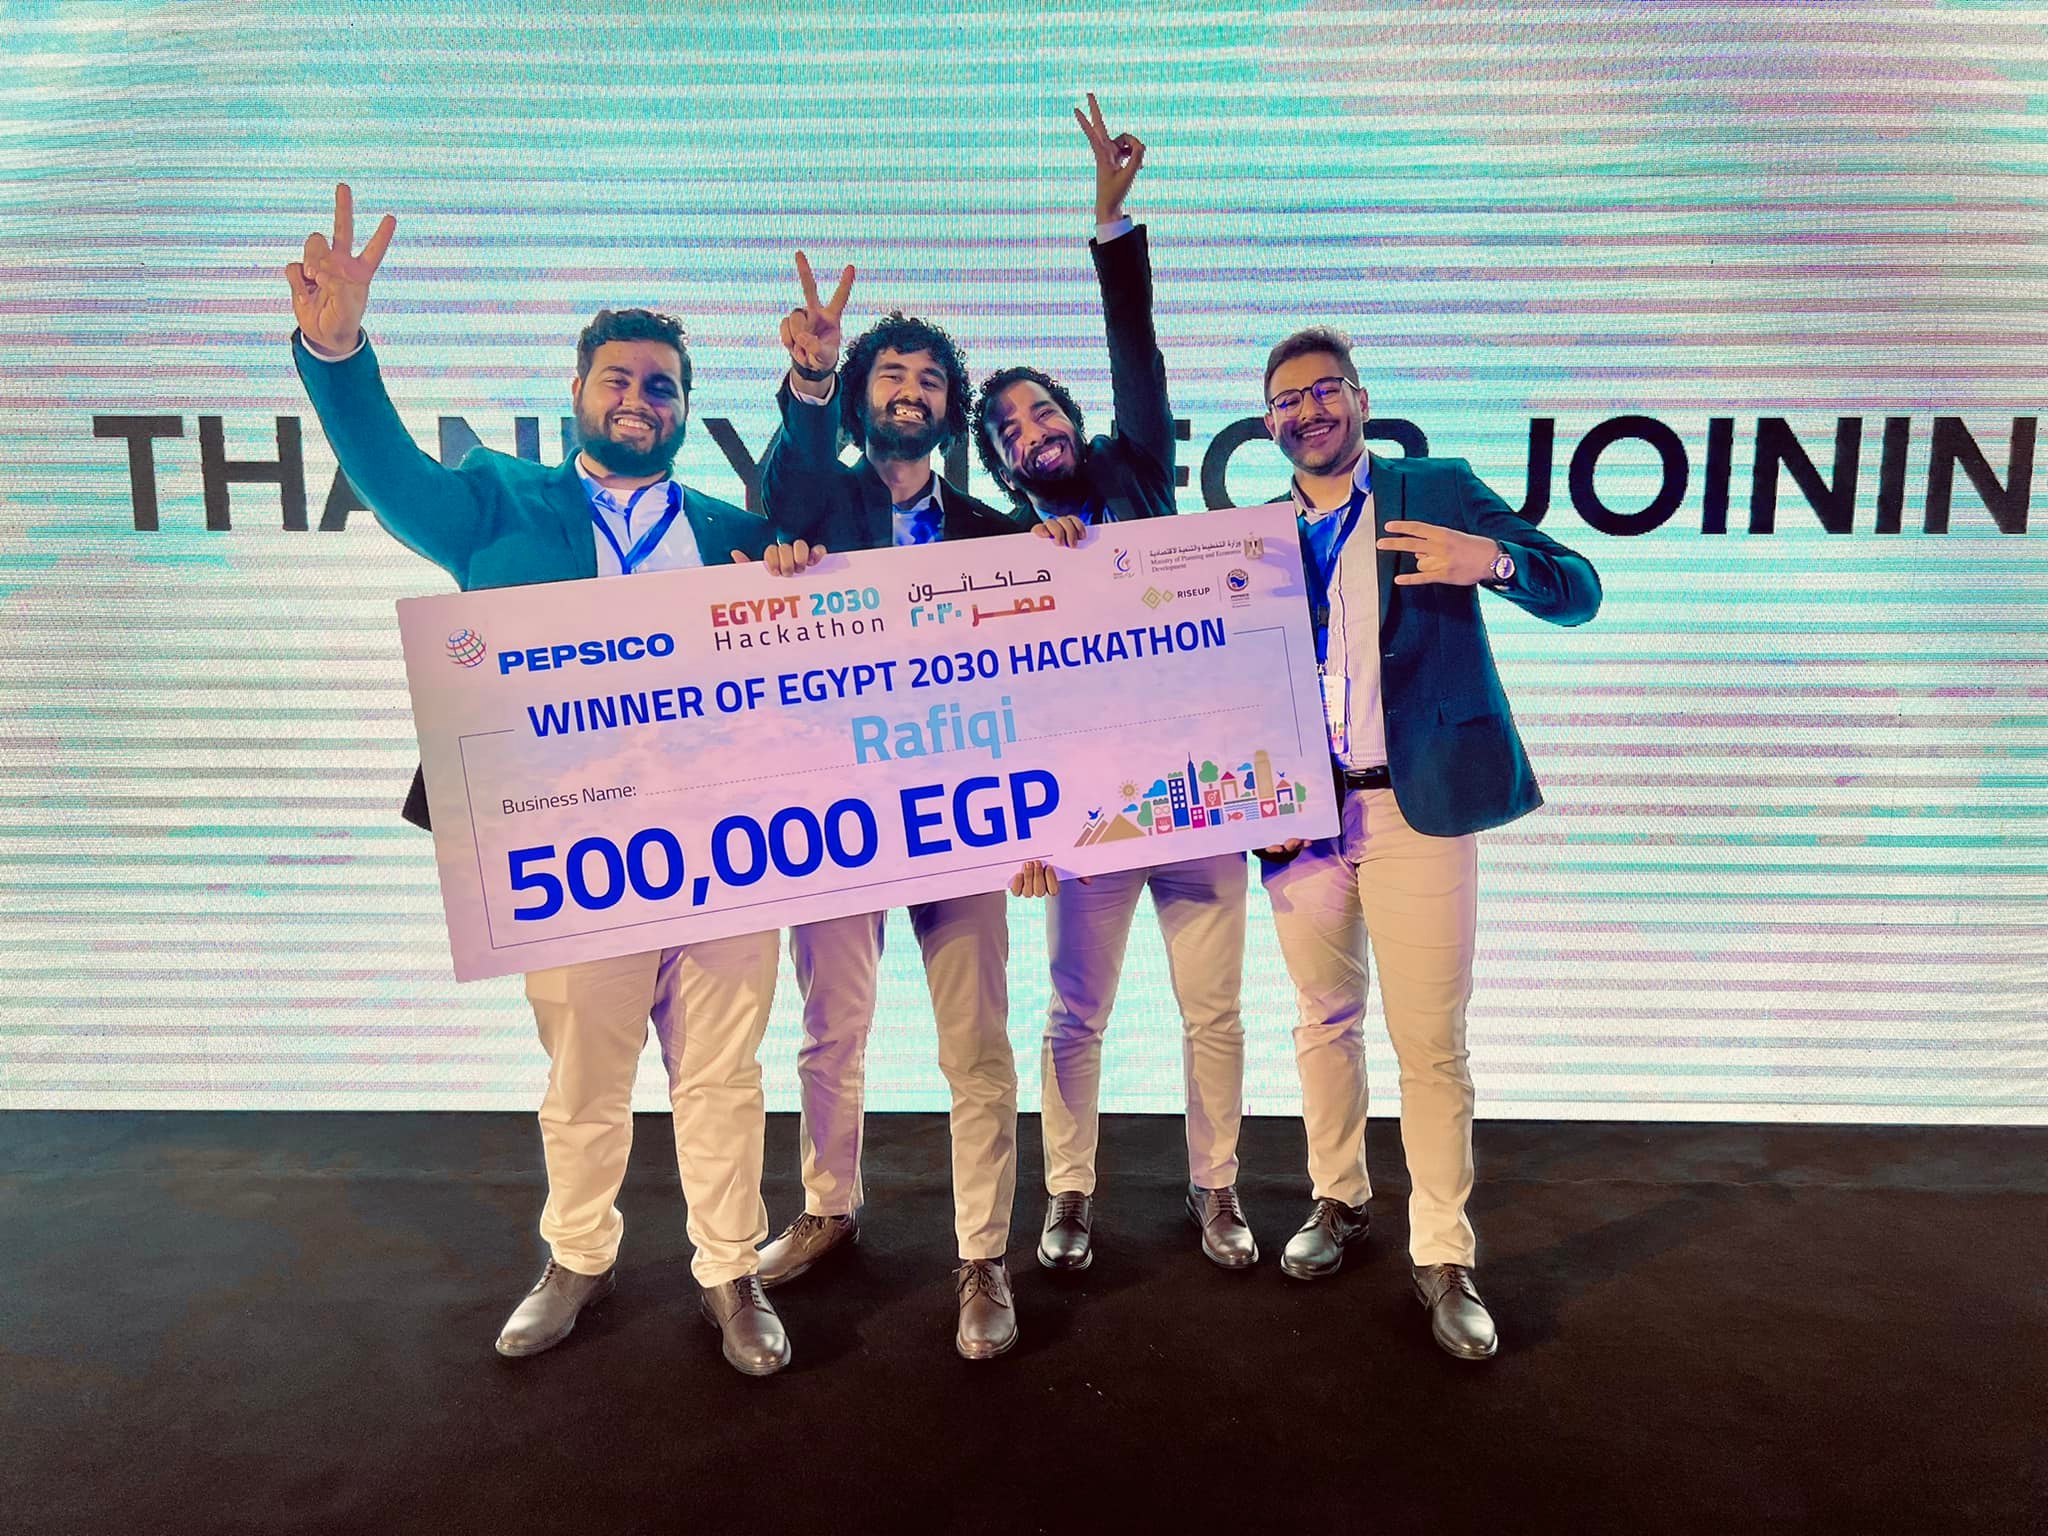 Congratulations "Rafiqi" for hunting the 1st place of Egypt 2030 Hacathon